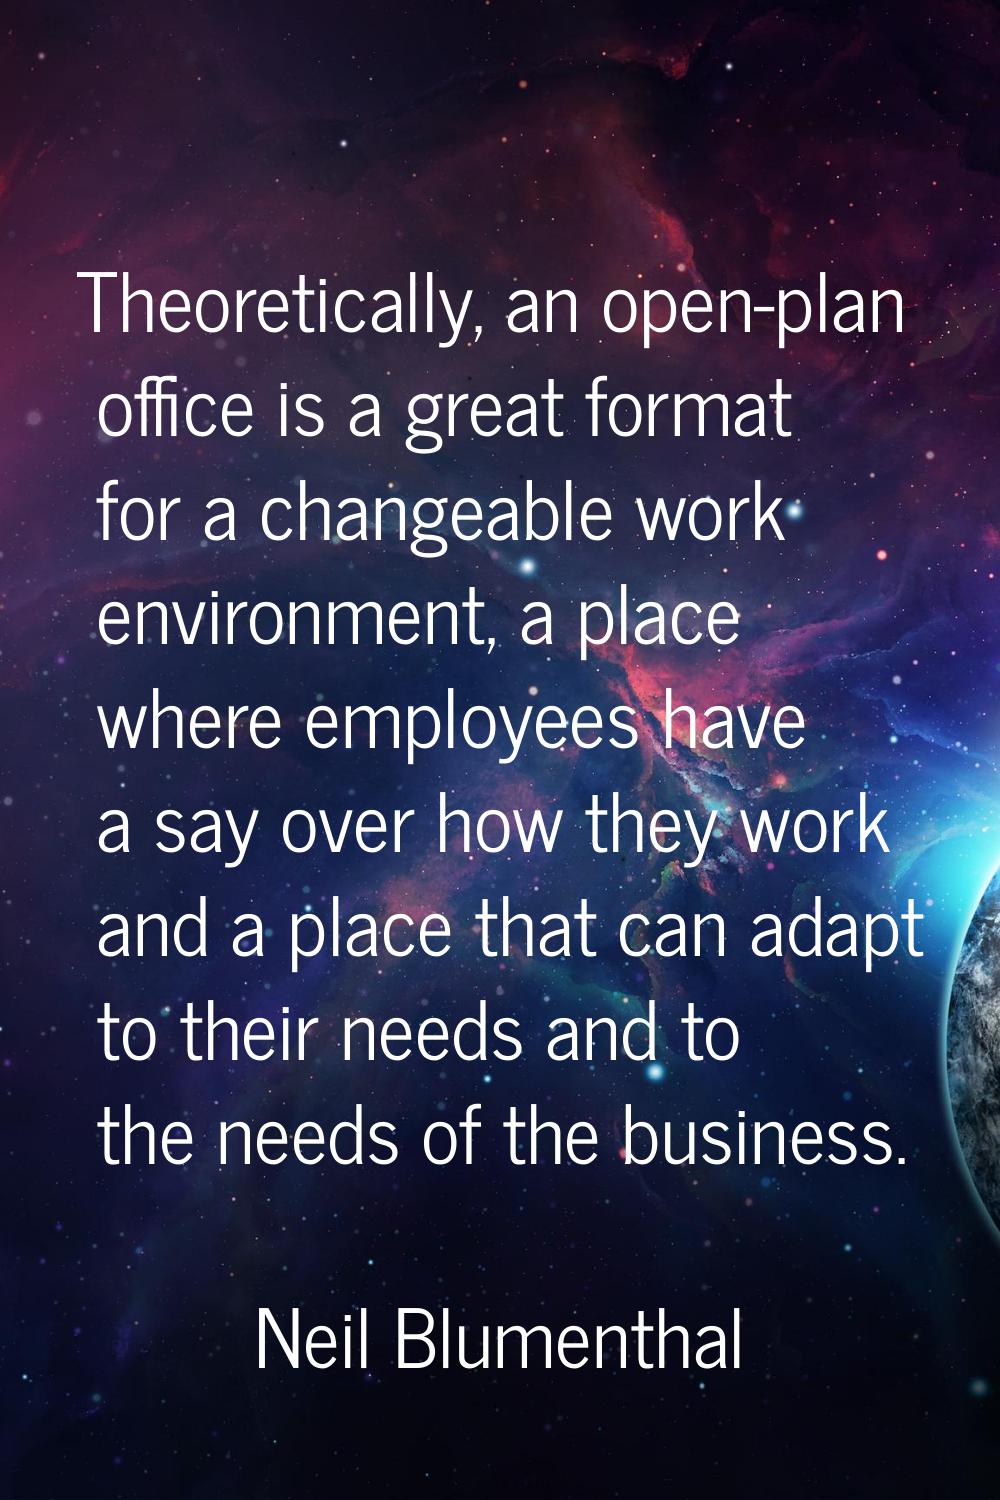 Theoretically, an open-plan office is a great format for a changeable work environment, a place whe